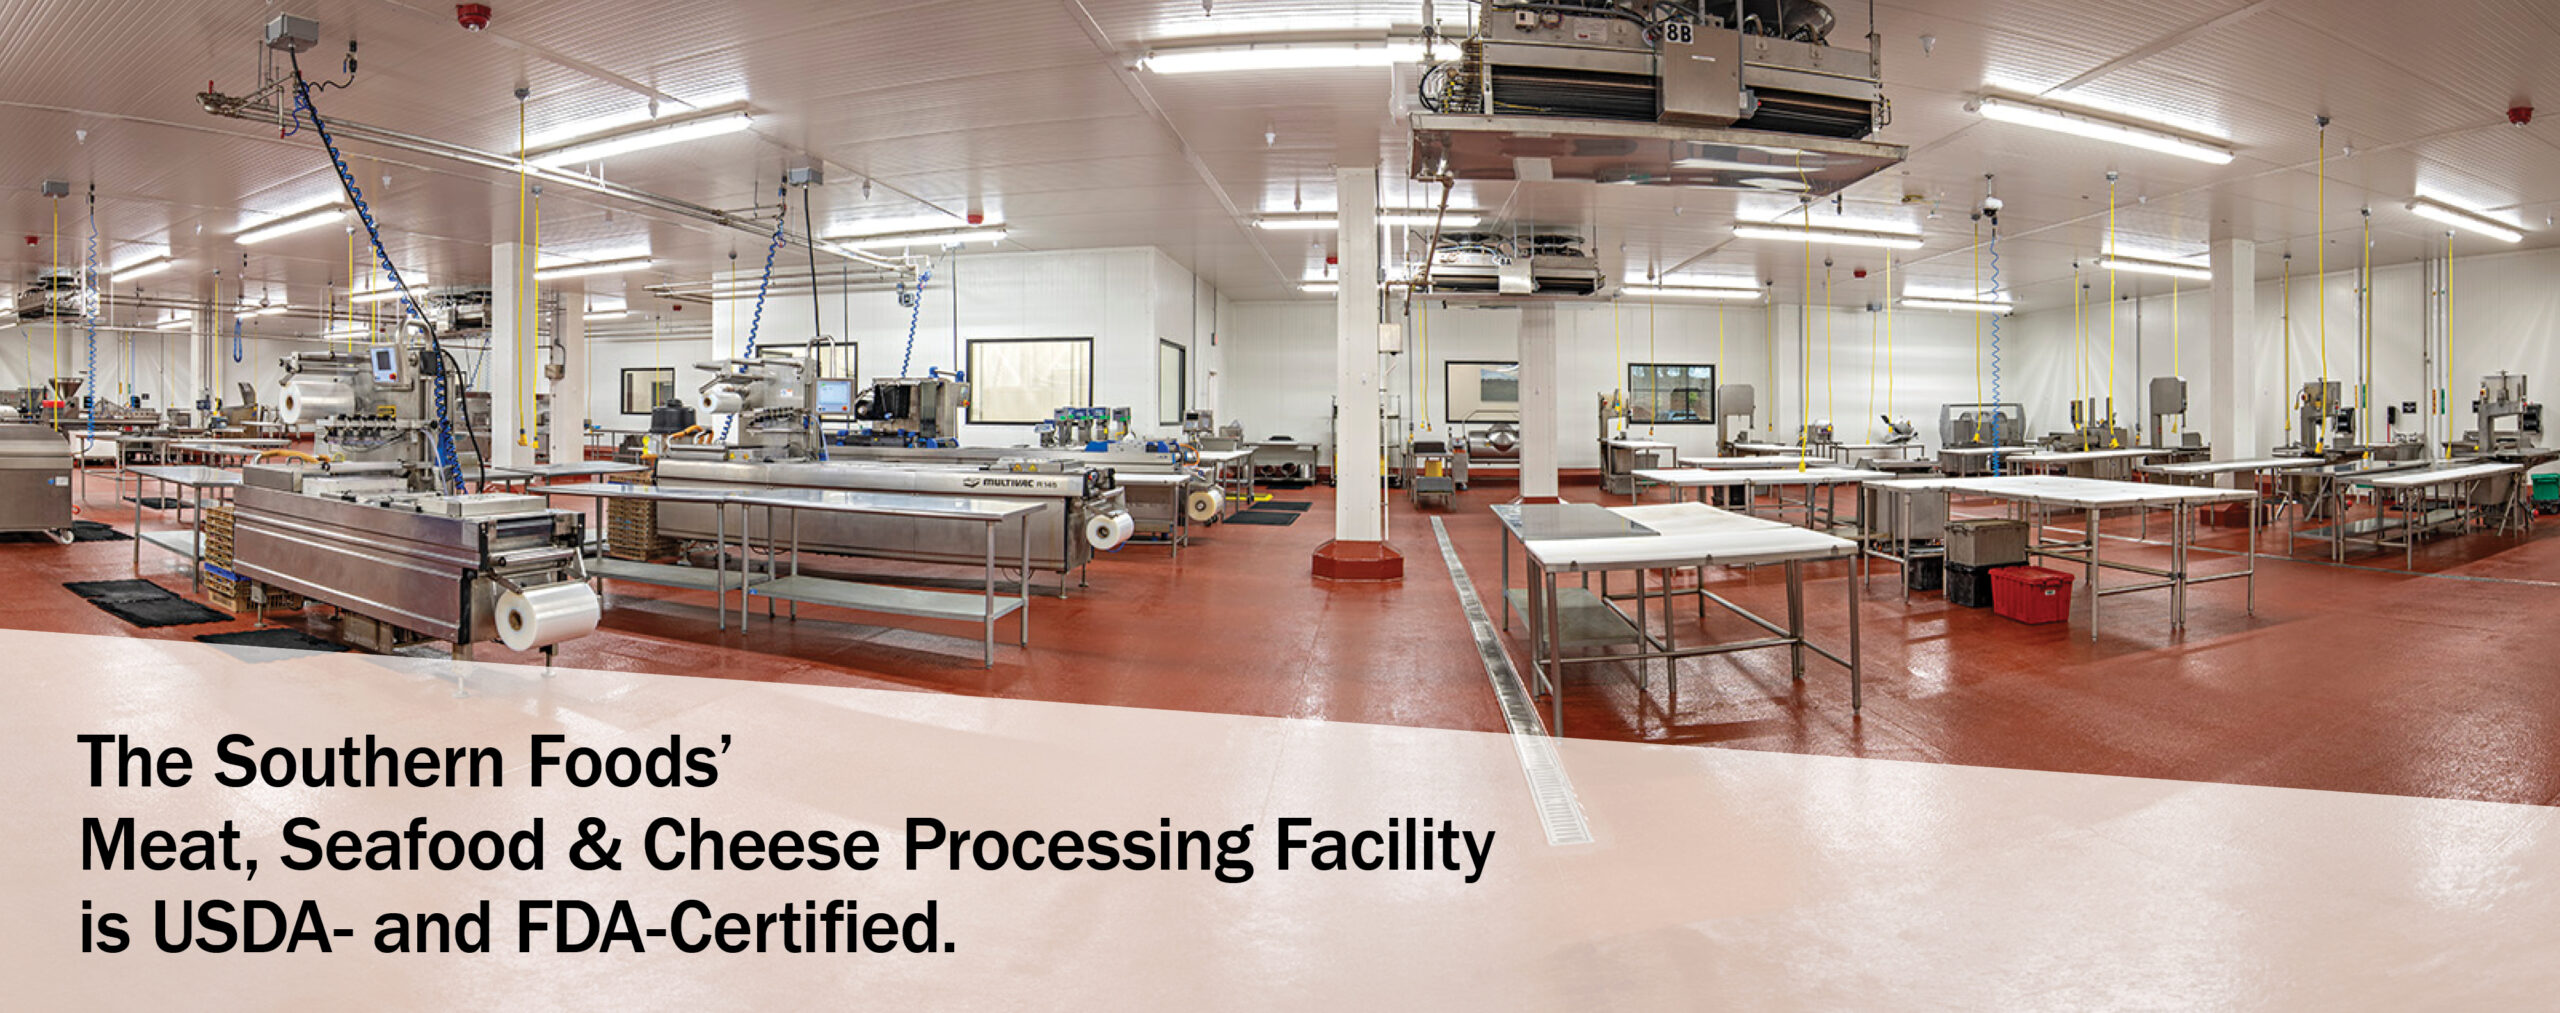 Design-Build Solutions: The Southern Foods' Meat, Seafood & Cheese Processing Facility is USDA- and FDA-Certified.